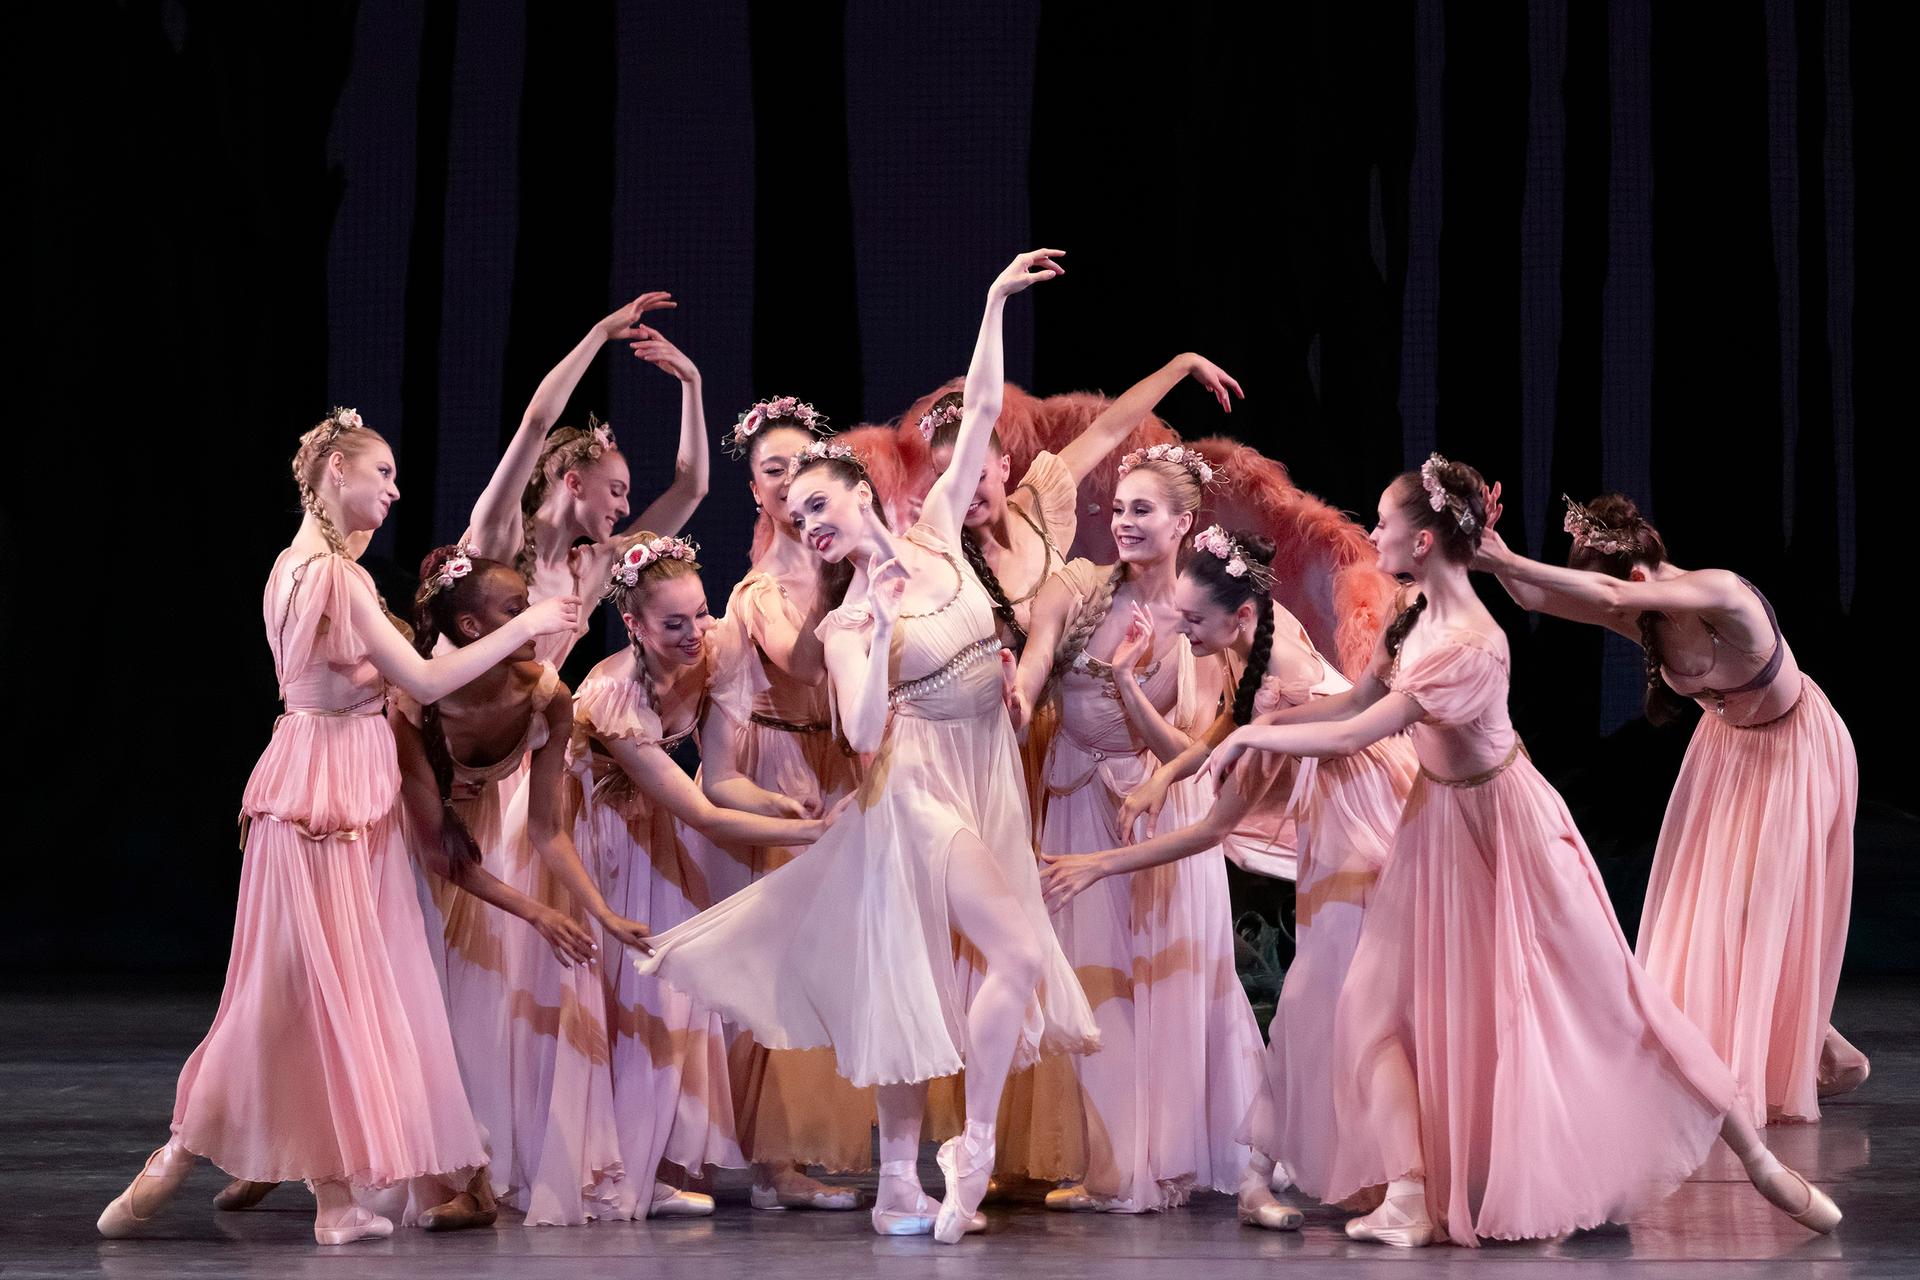 New York City Ballet, on stage